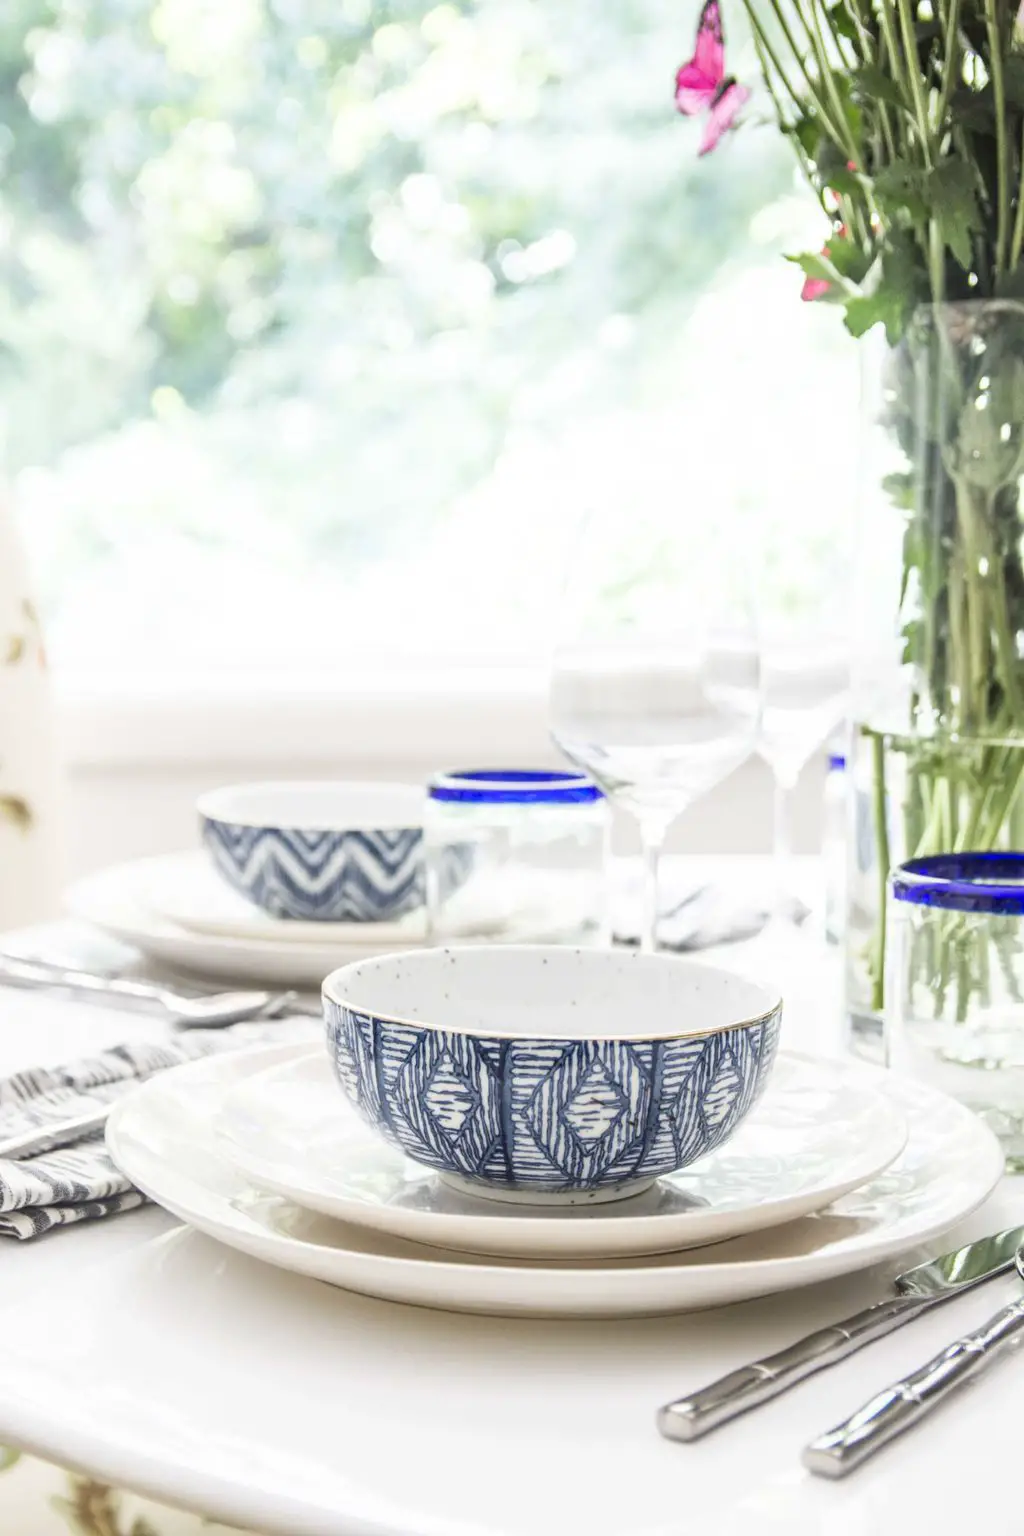 Whimsical patterned table setting on Thou Swell @thouswellblog